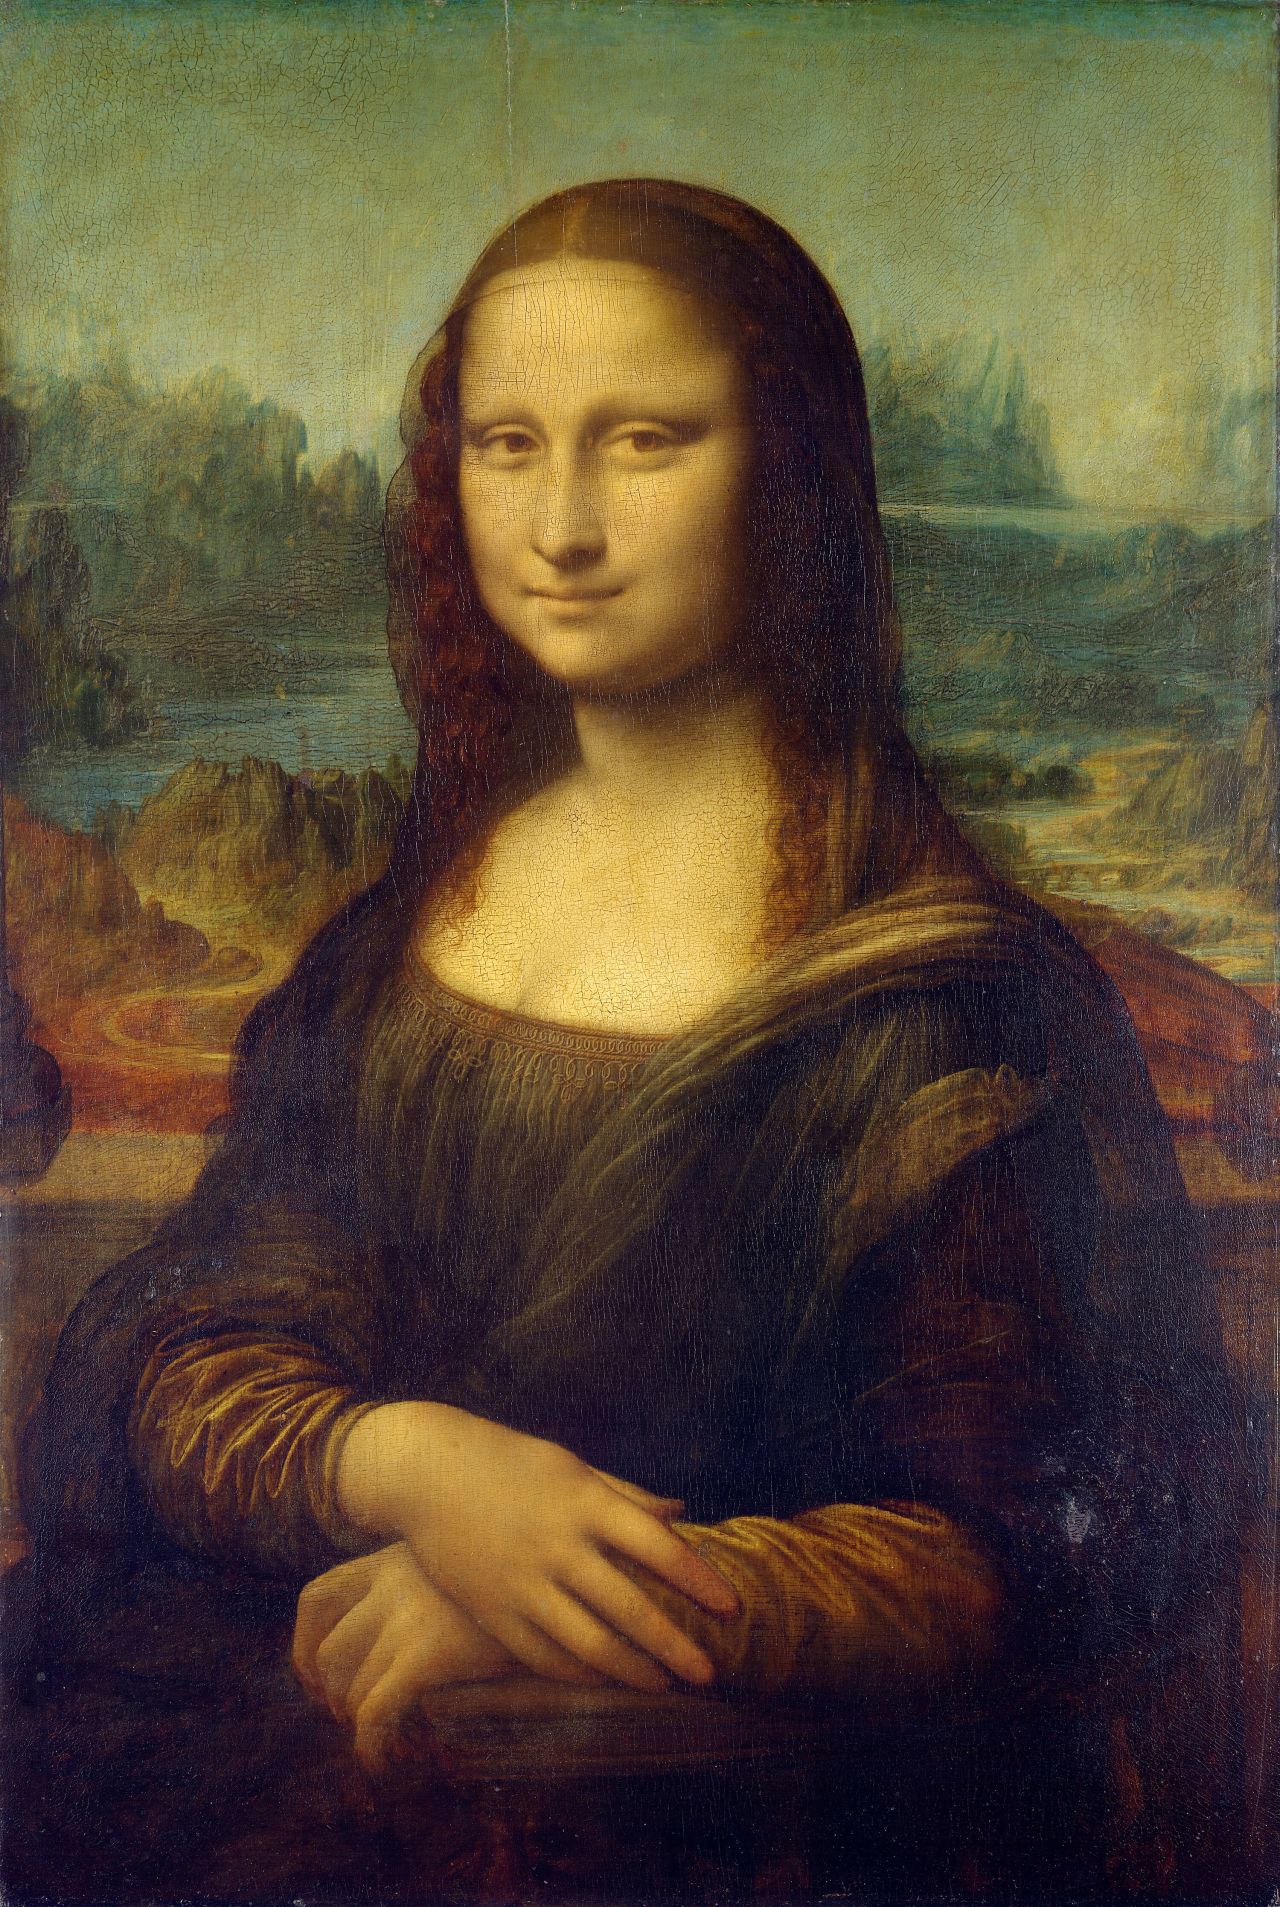 Da Vinci's Mona Lisa is believed by many to be unfinished.